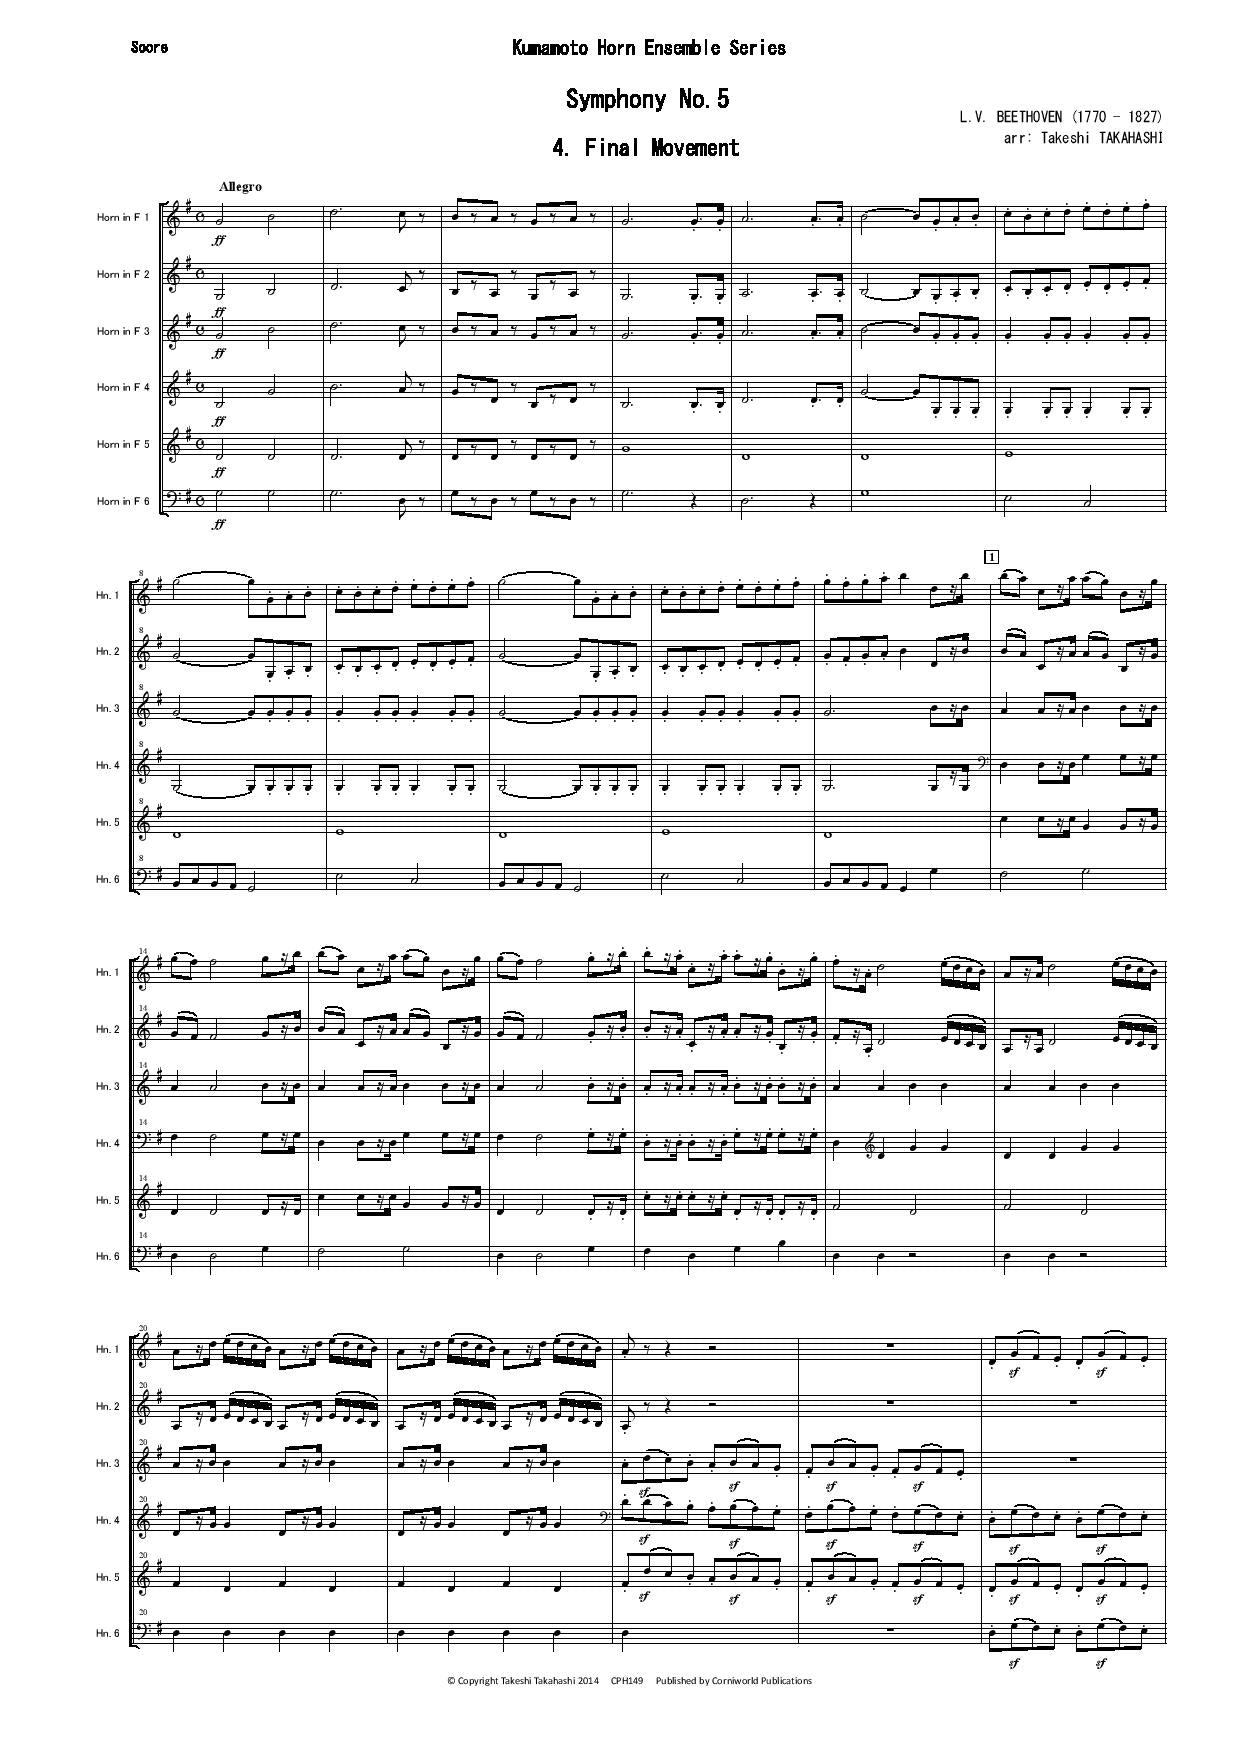 Final Mvt from Symphony No.5 (Beethoven) CPH149